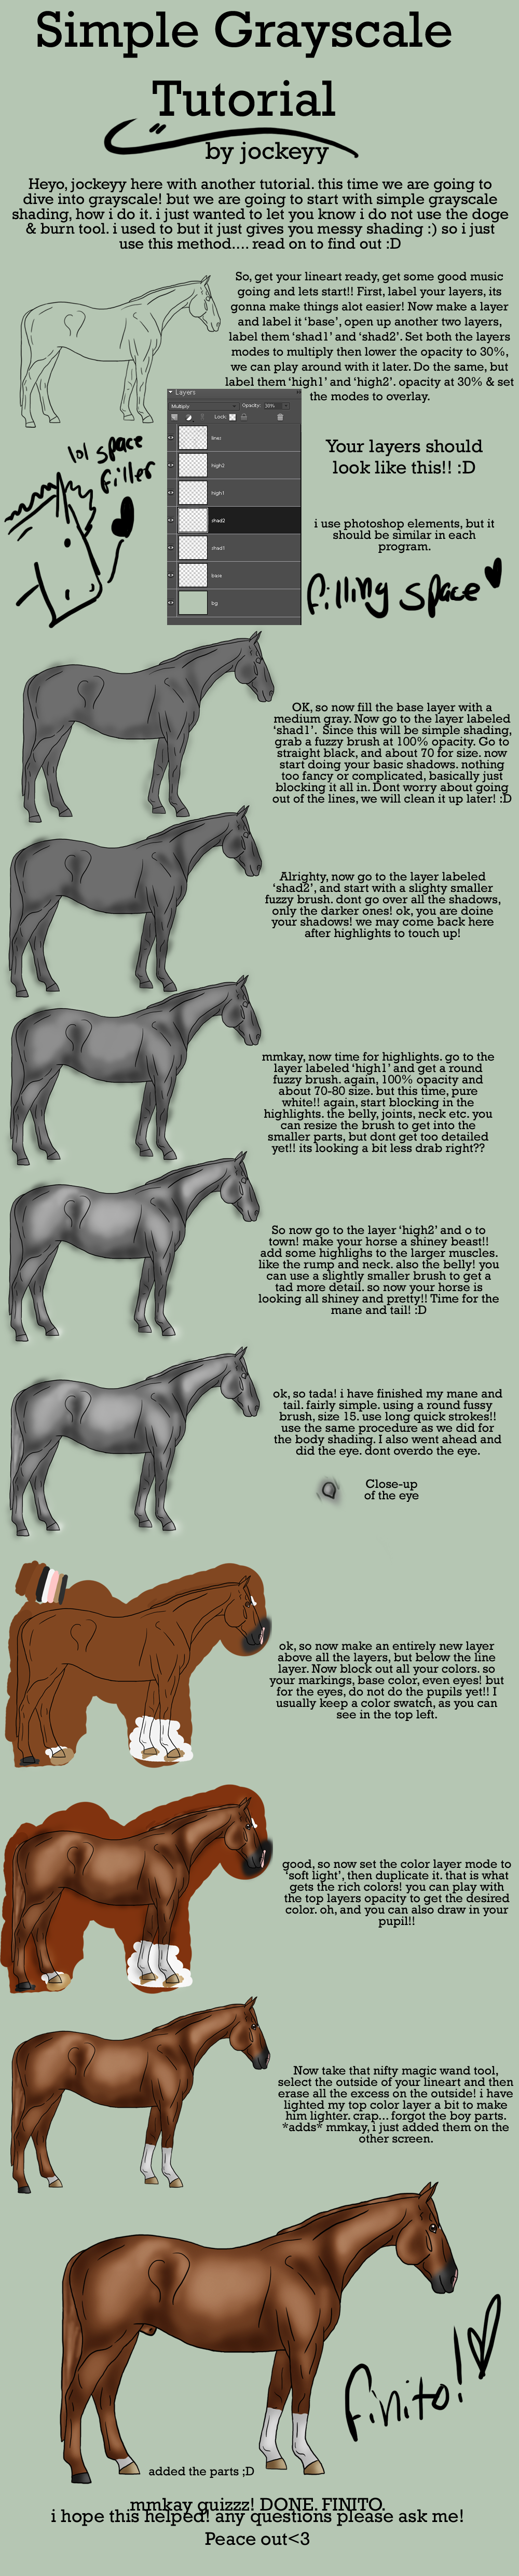 grayscale Tutorial